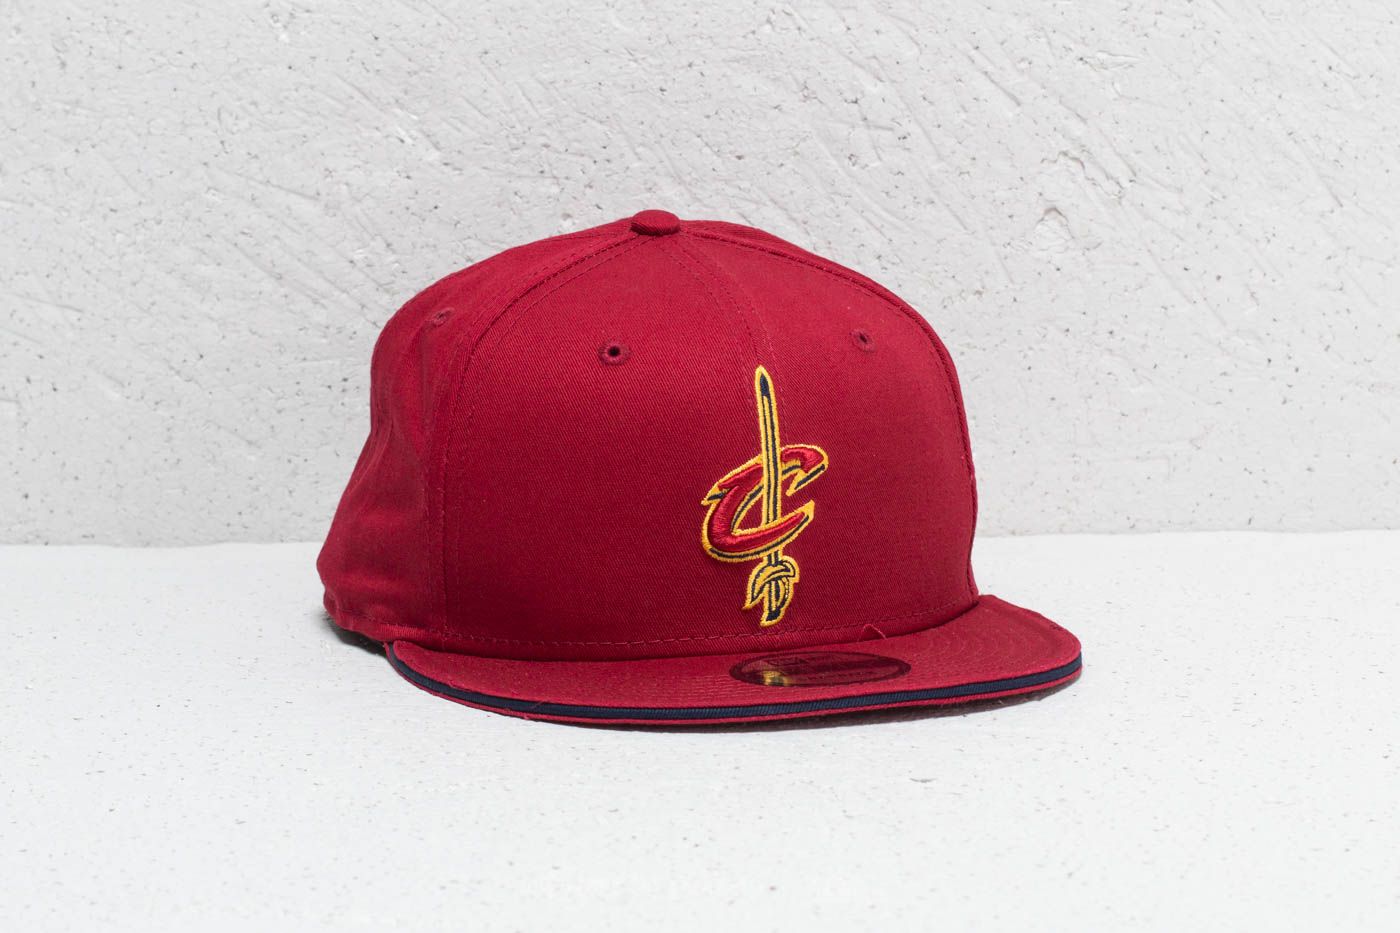 Casquettes New Era 9Fifty NBA Cleveland Cavaliers Cap Red